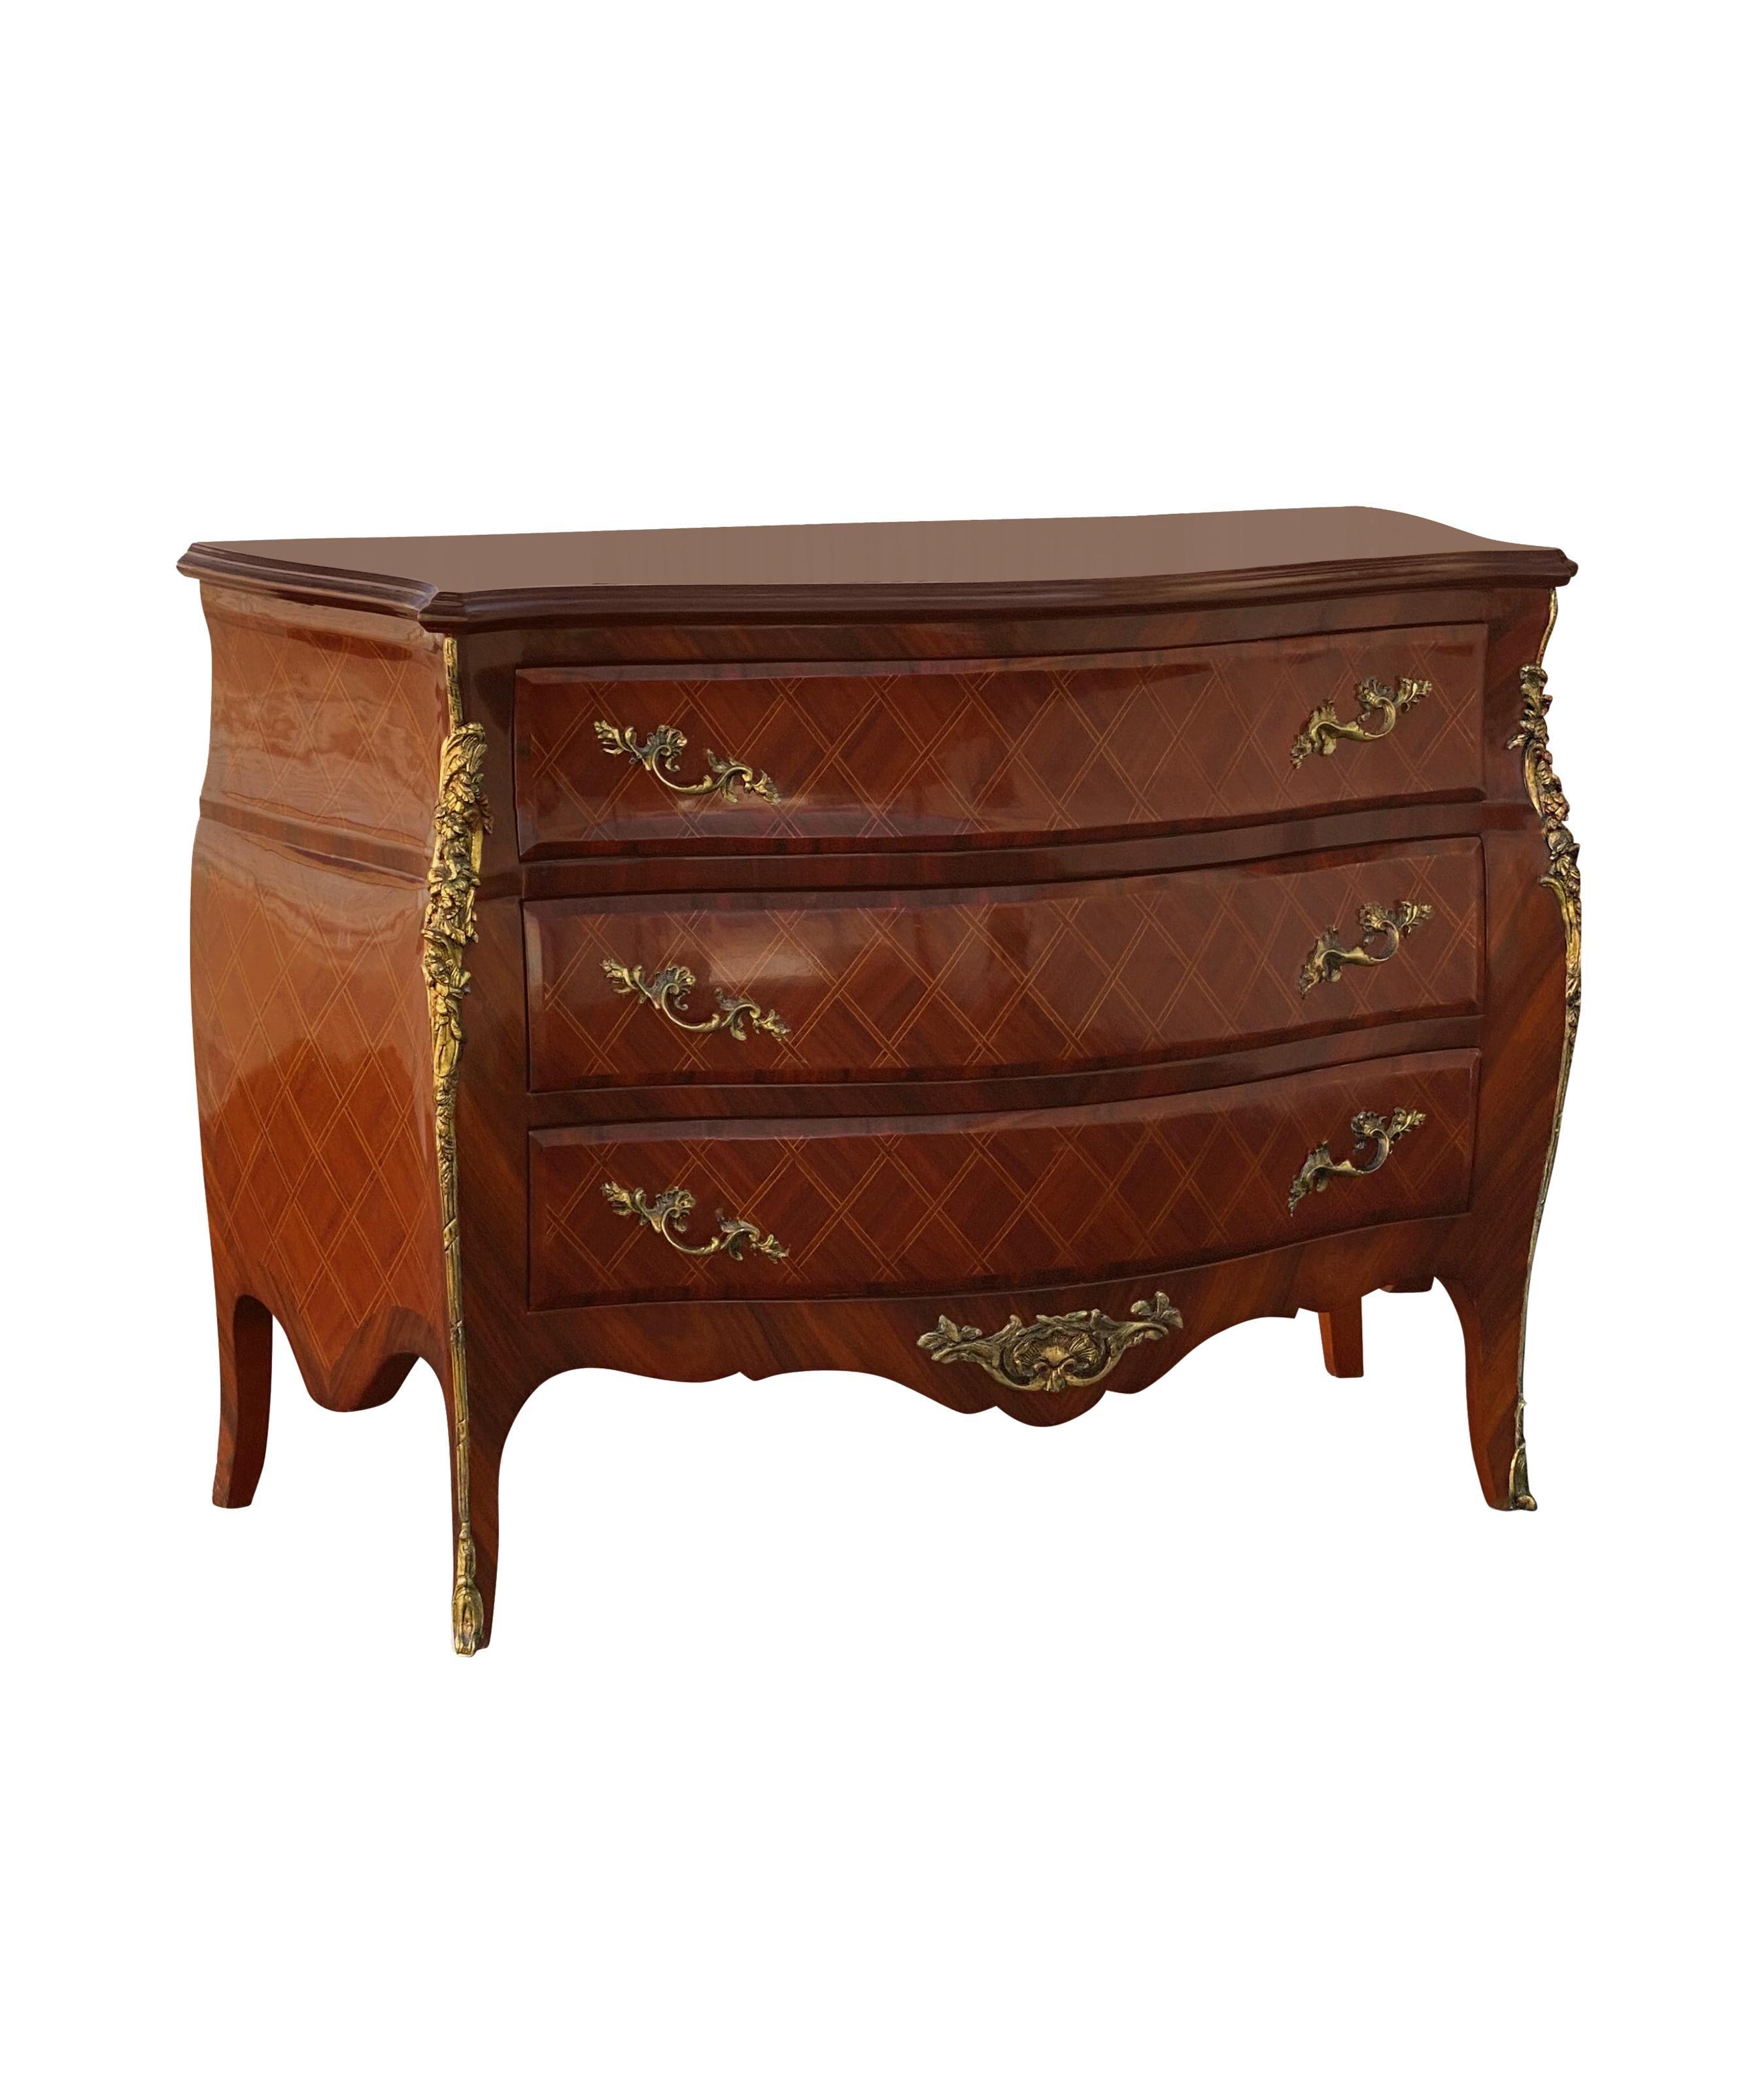 This is a beautiful reproduction piece of a French Louis style antique commode or chest of drawers (or dresser), with a bow bombe shape. Giltwork metal handles and decorations throughout as well as a diamond fretwork inlay design.